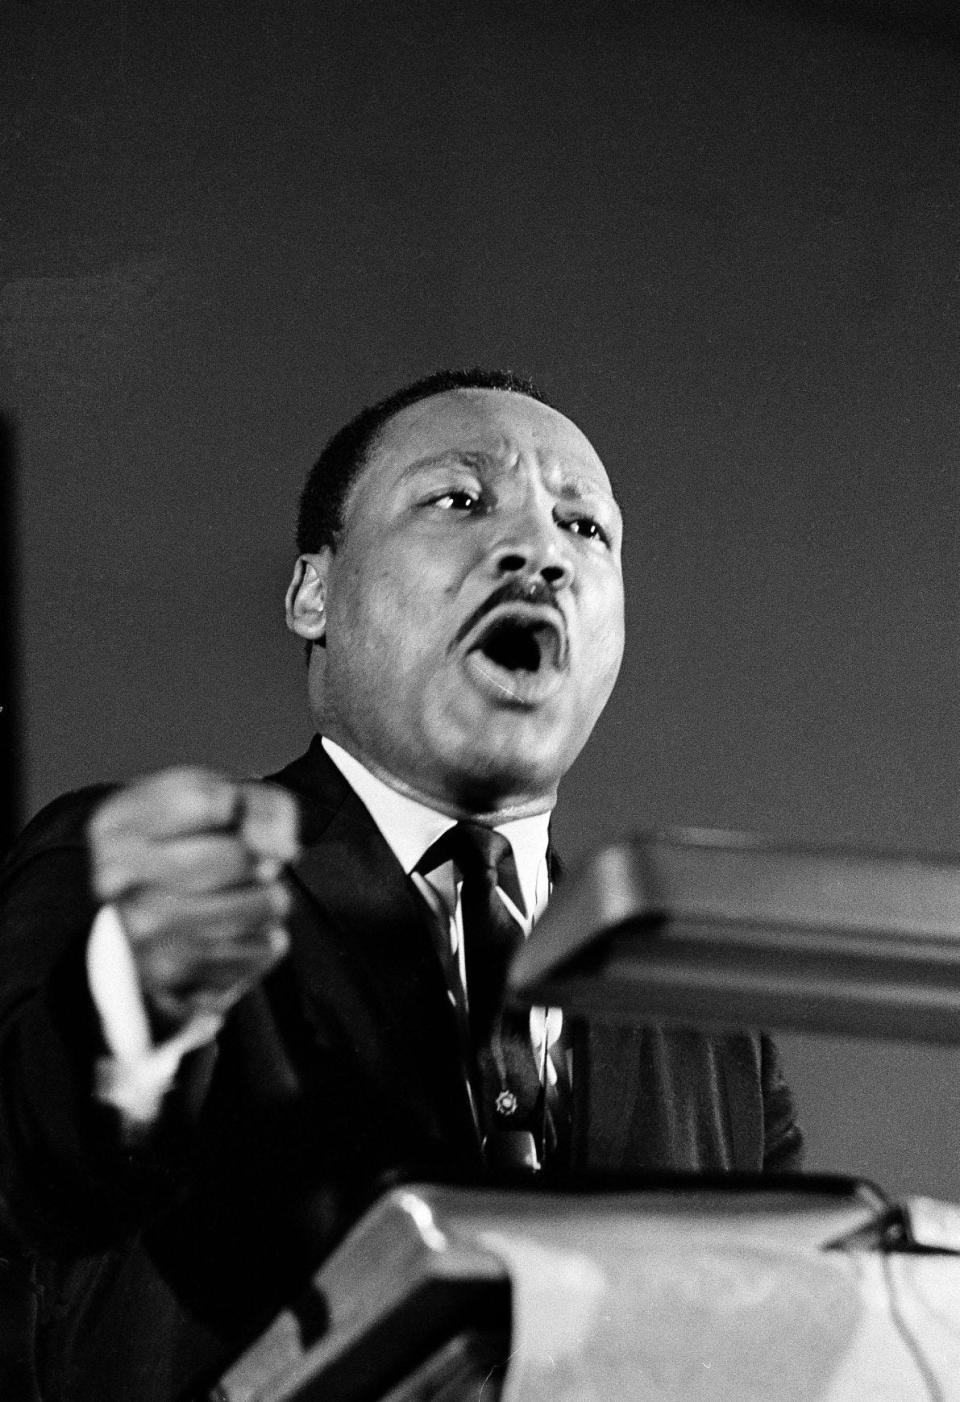 In this AP file photo, the Rev. Martin Luther King Jr. is shown in February 1968 in Selma, Ala.